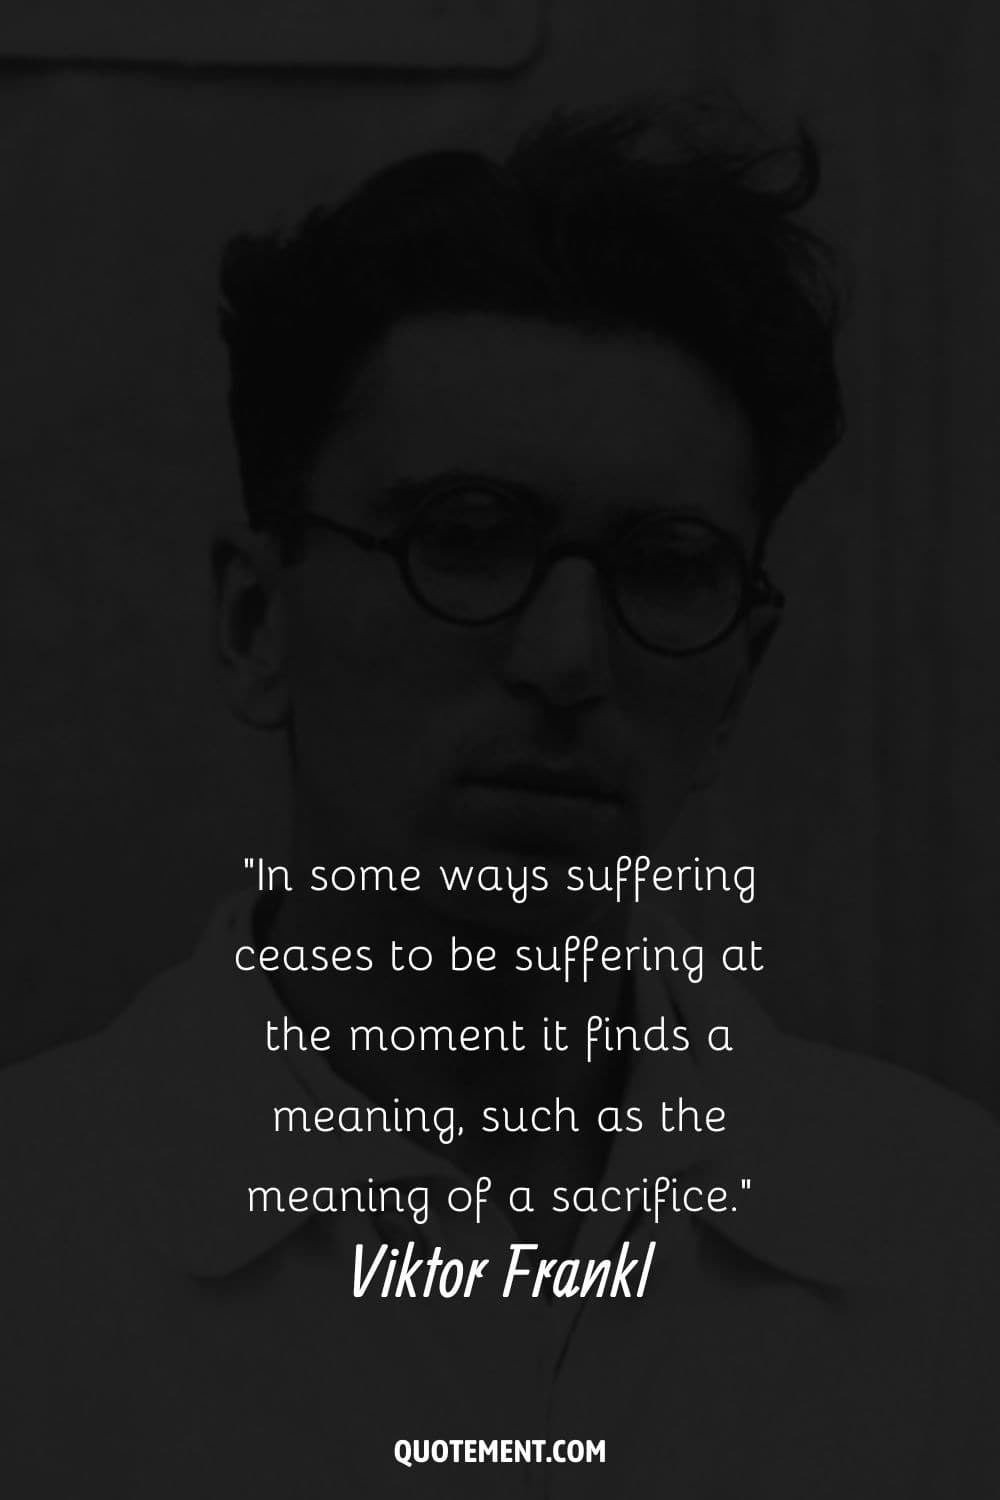 Image of Viktor Frankl wearing white shirt representing his quote on suffering.